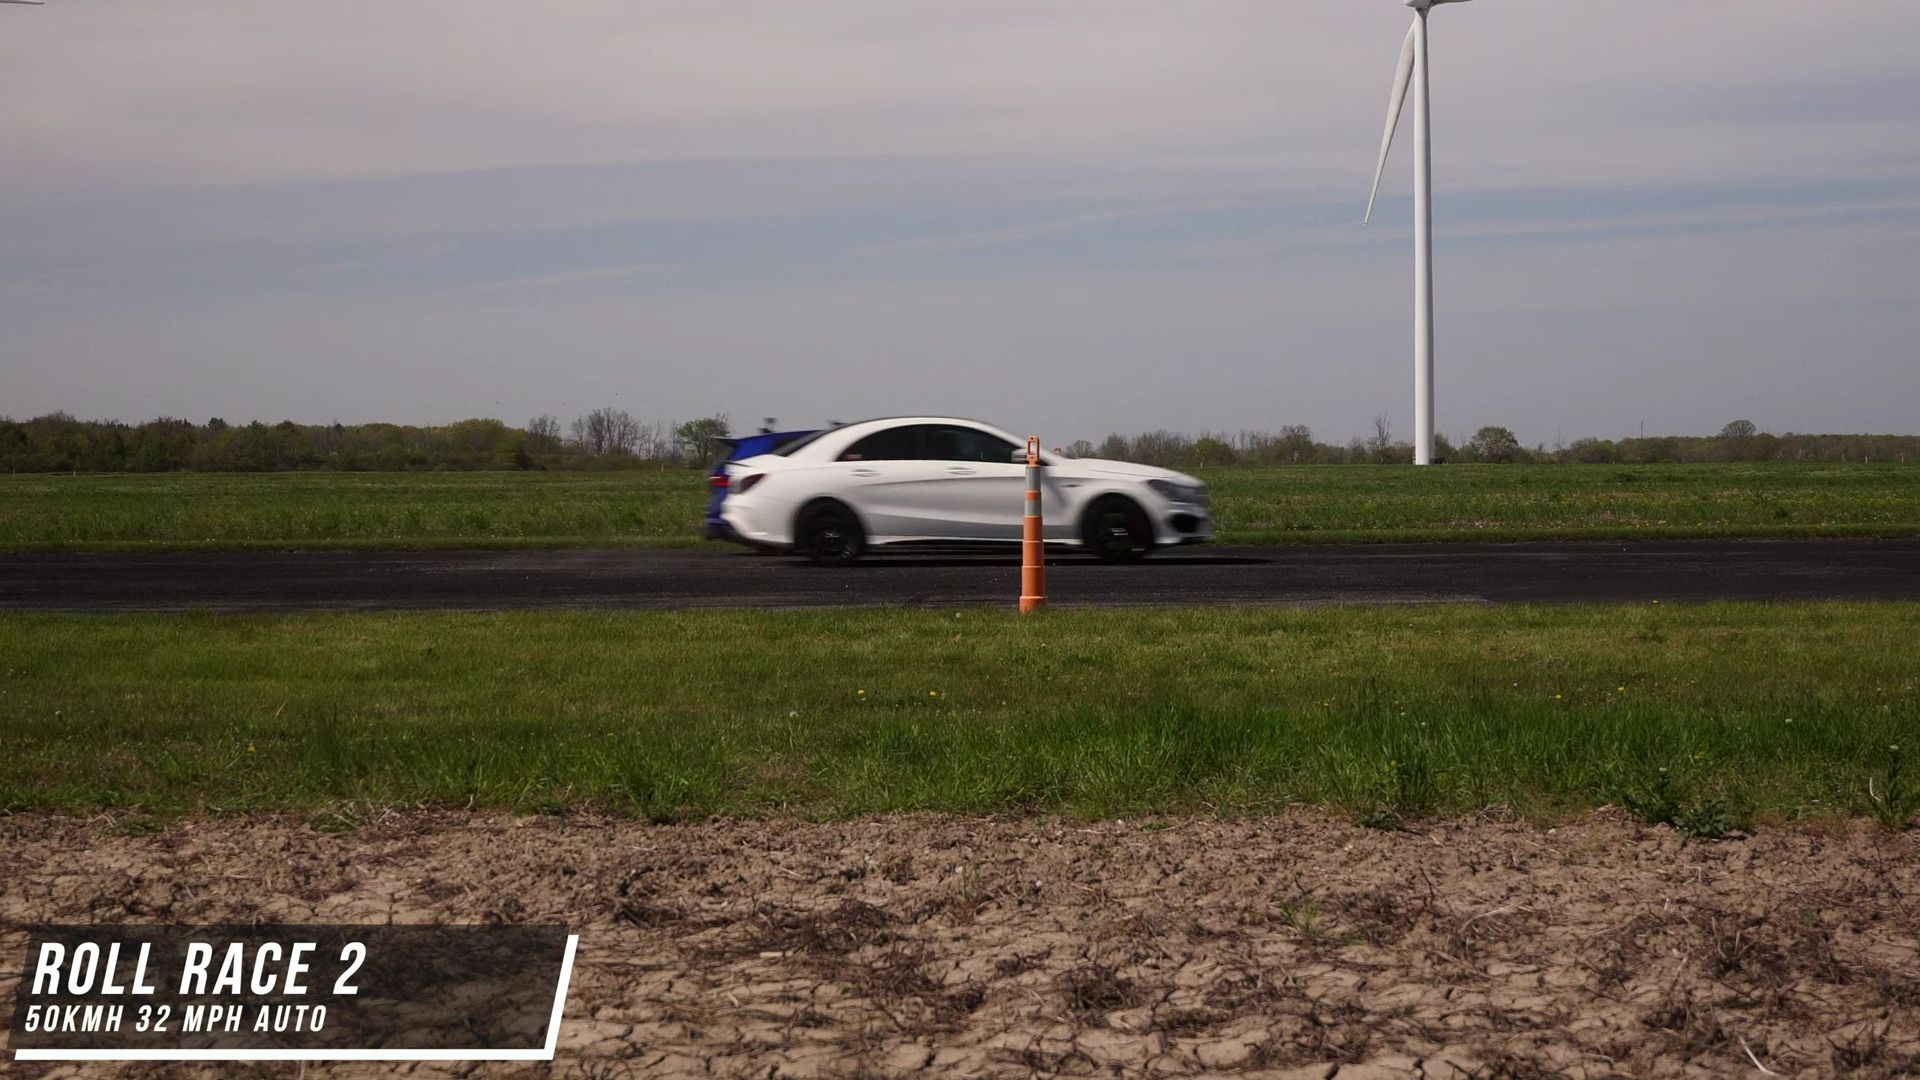 Audi's A8 Sedan Rolls With the Punches to Make T-Bone Crashes